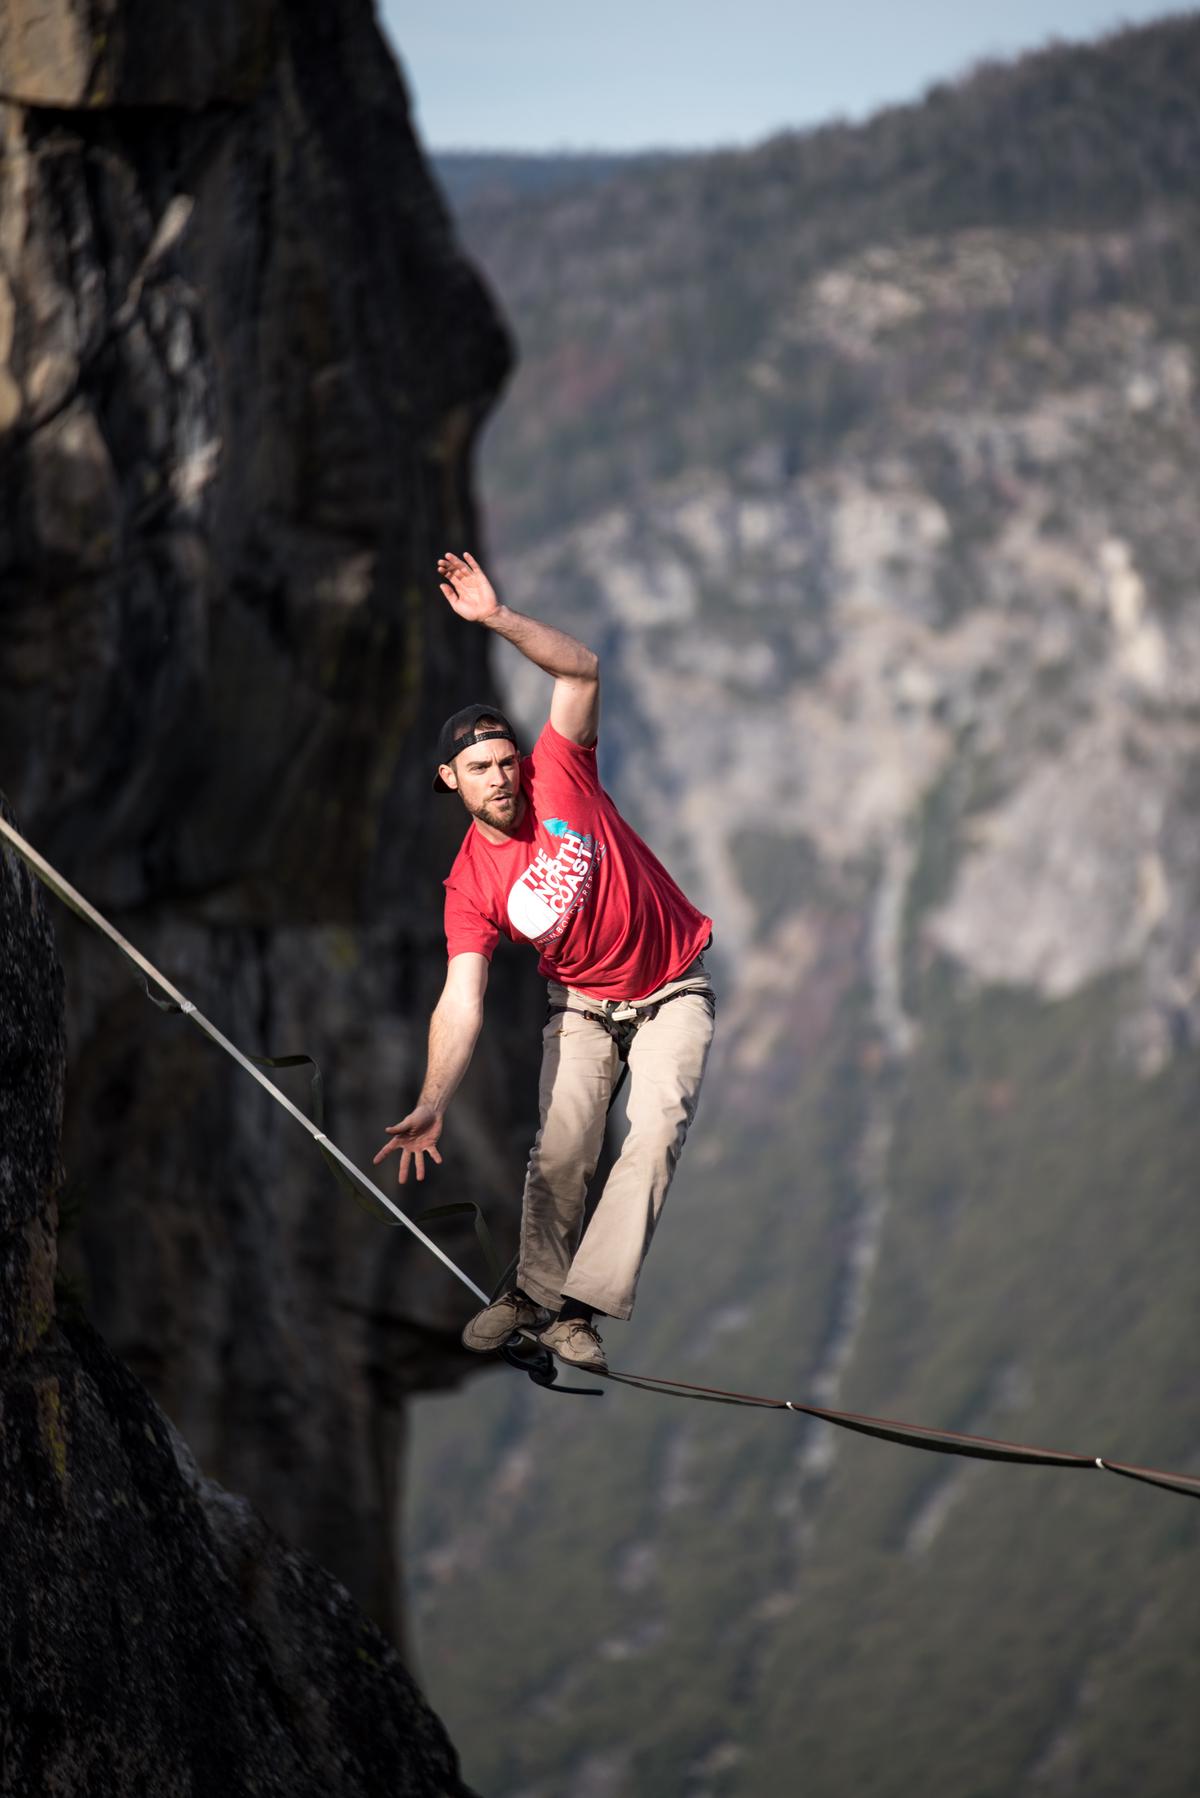 Image depicting a person balancing on a tightrope between two cliffs, representing the risks and challenges of overtrading in trading activities, with dashes instead of spaces